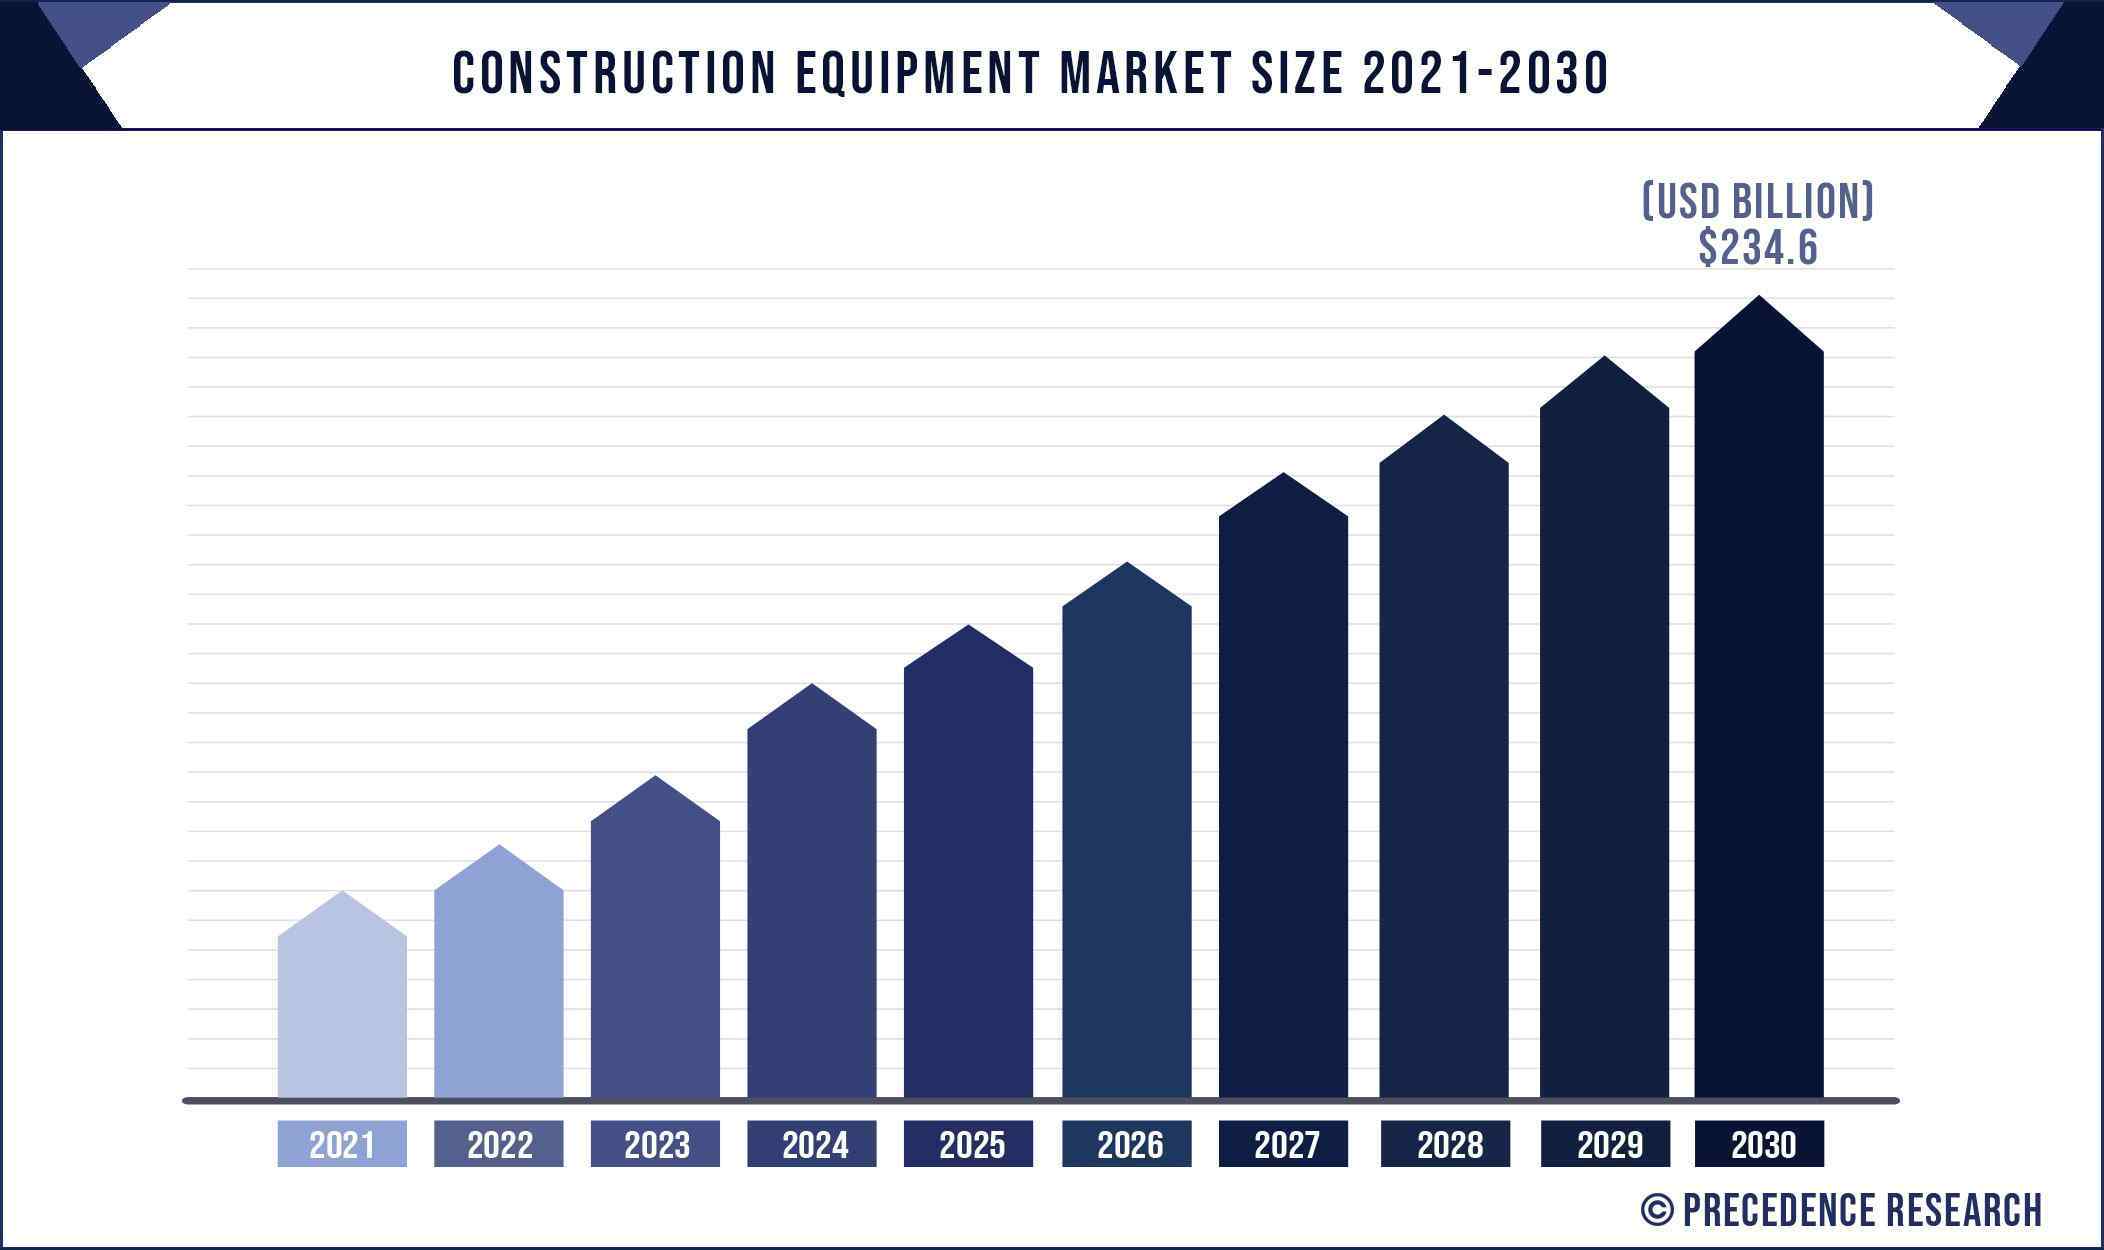 Construction Equipment Market Size 2021 to 2030